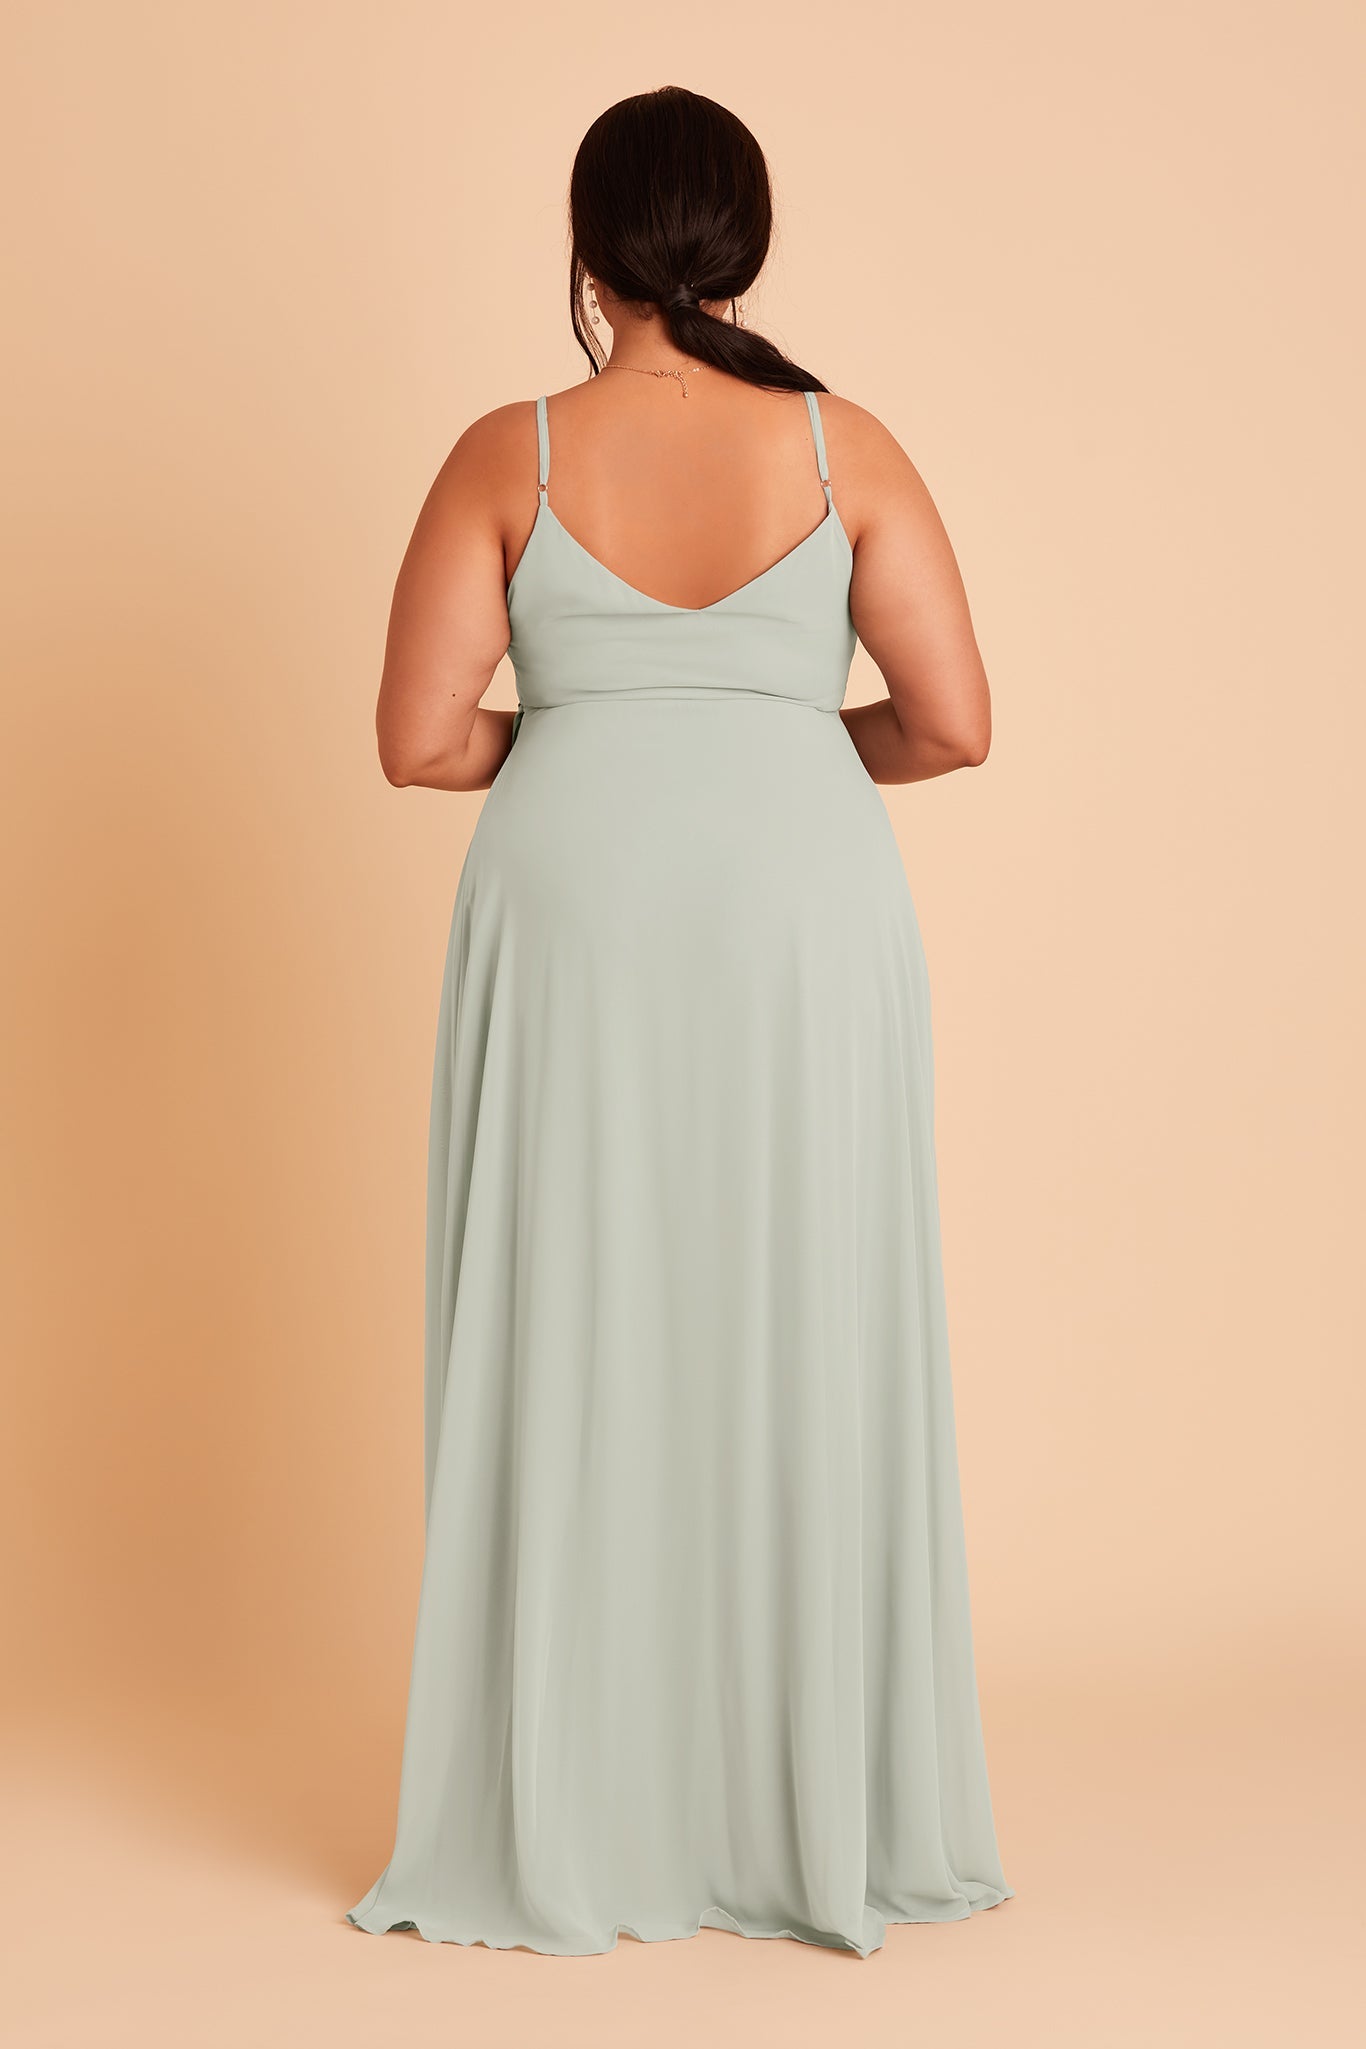 Back view of the Cindy Plus Size Bridesmaid Dress in sage chiffon features a slip-style back with a gracefully flowing floor-length skirt.